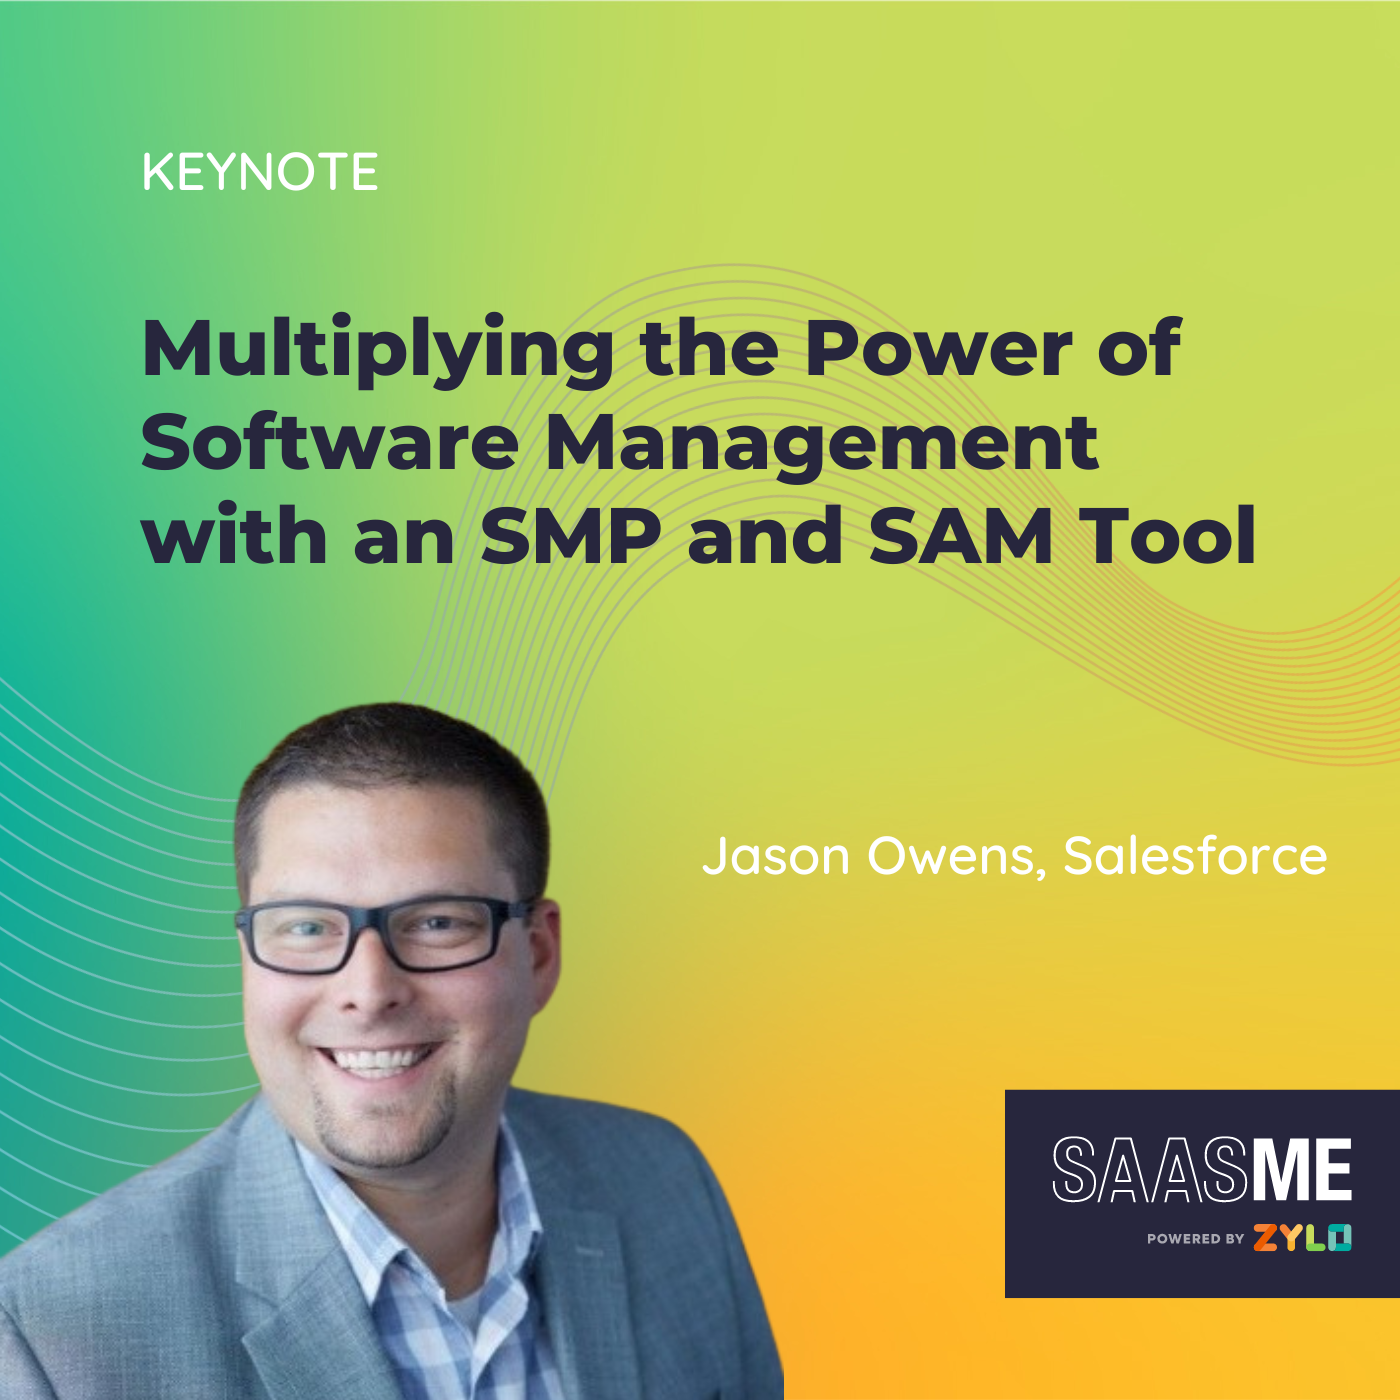 Multiplying the Power of Software Management with an SMP and SAM Tool